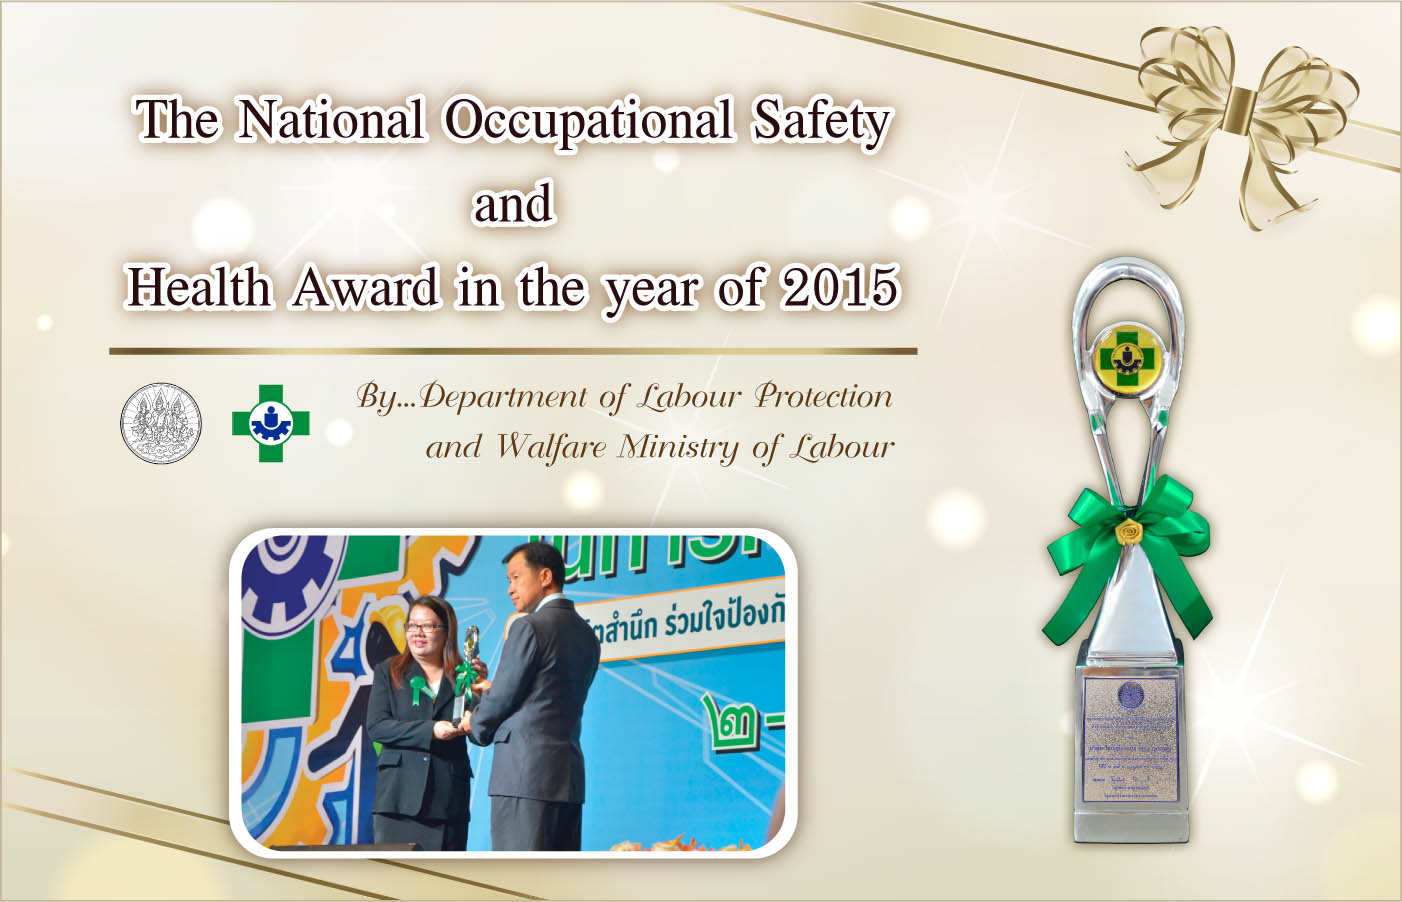 National Occupational Safety and Health Award in the year of 2016